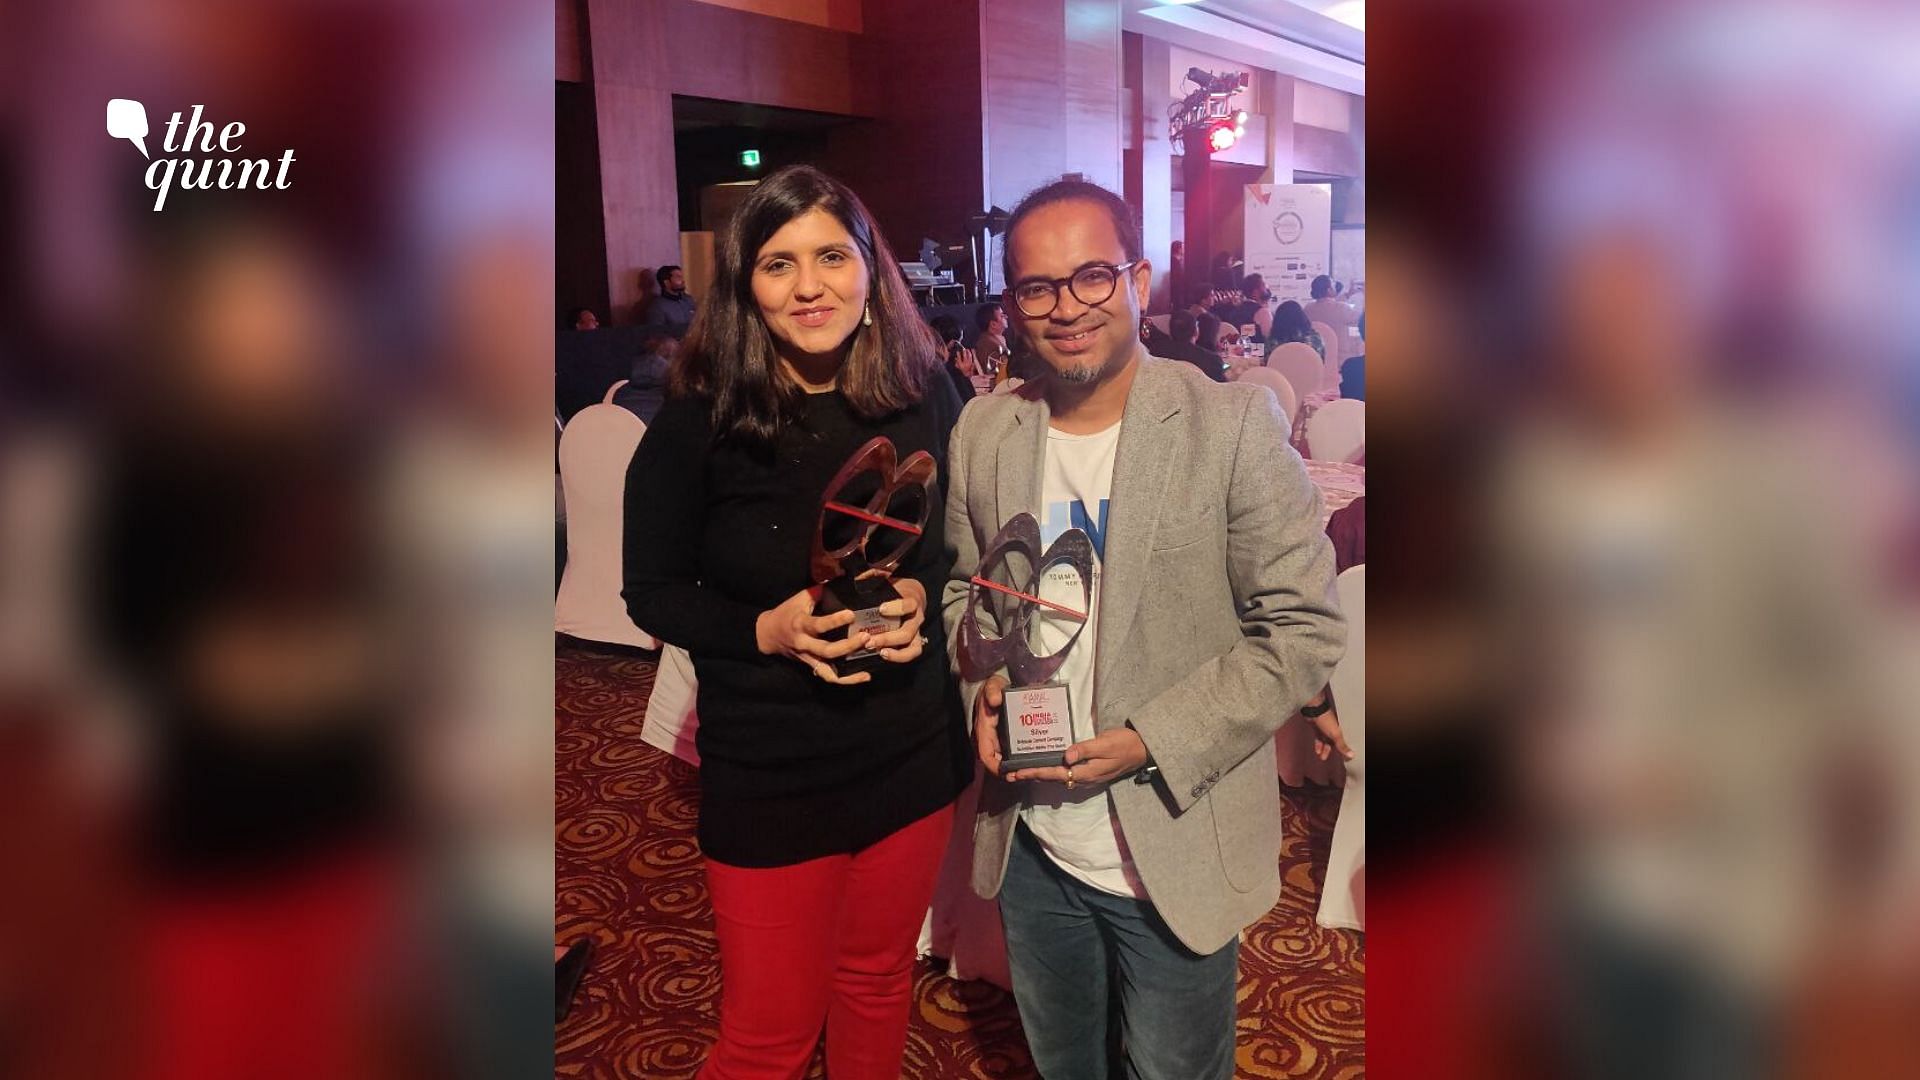 The Quint bagged two silvers at the 10th India Digital Awards.